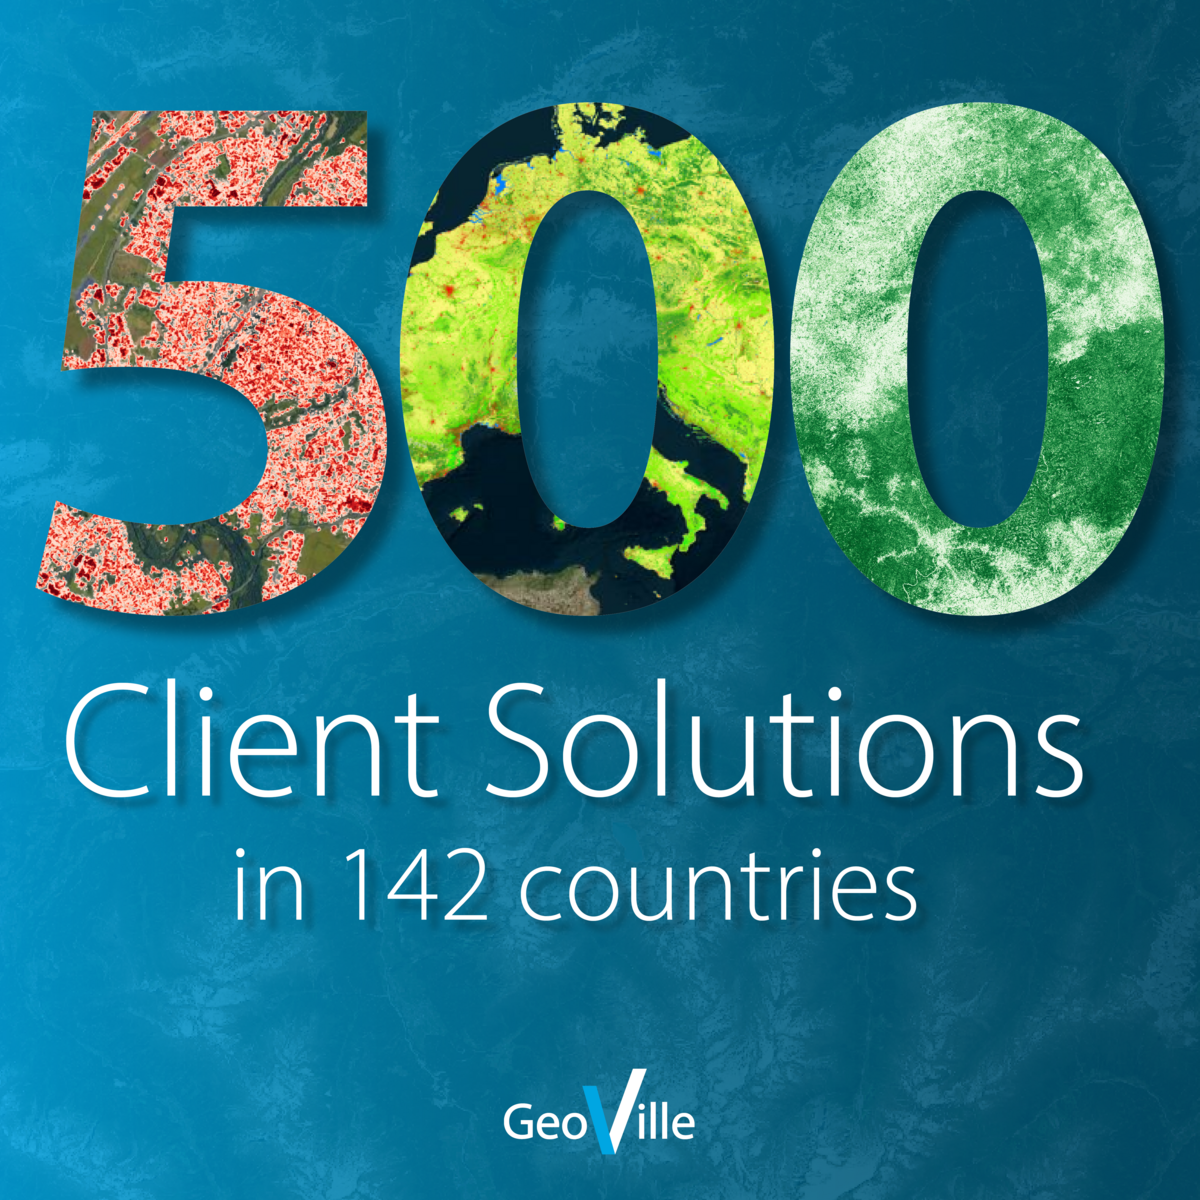 500 client solutions in 142 countries